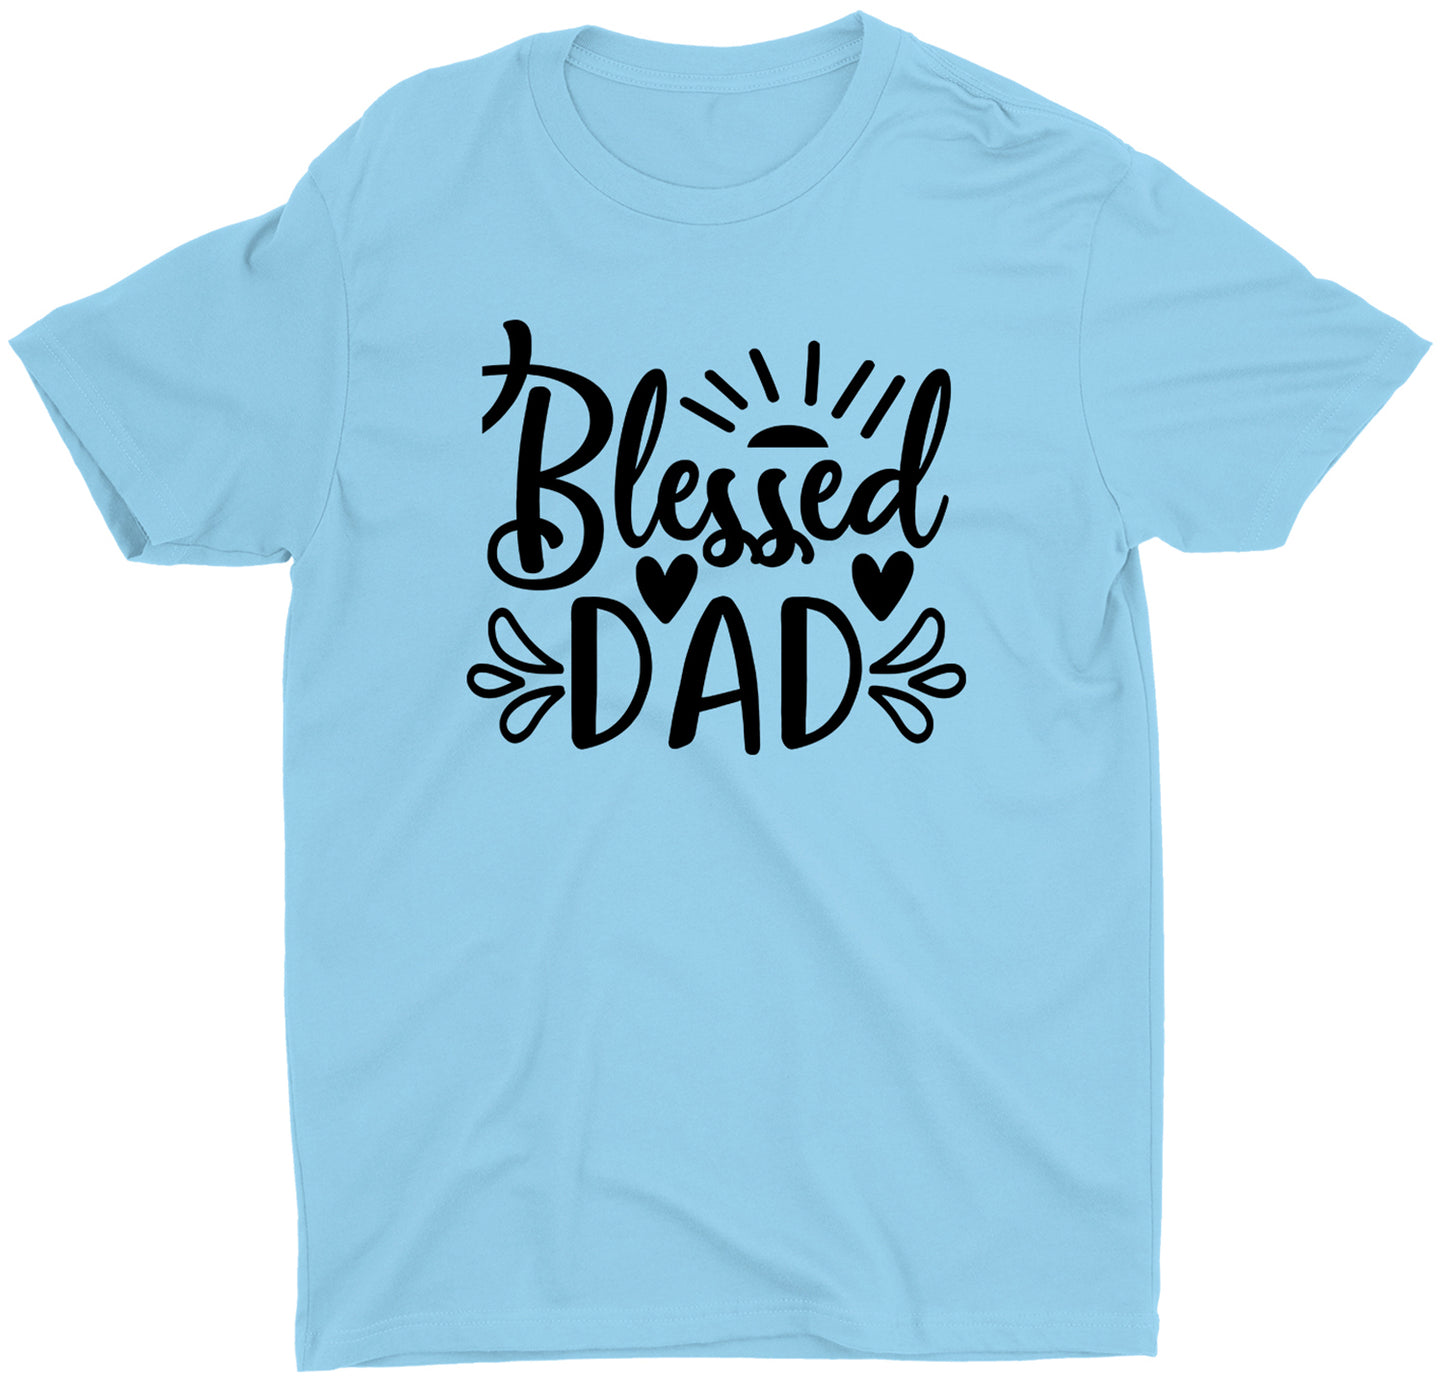 Blessed Daddy Religious Christian T-Shirts For Fathers Day